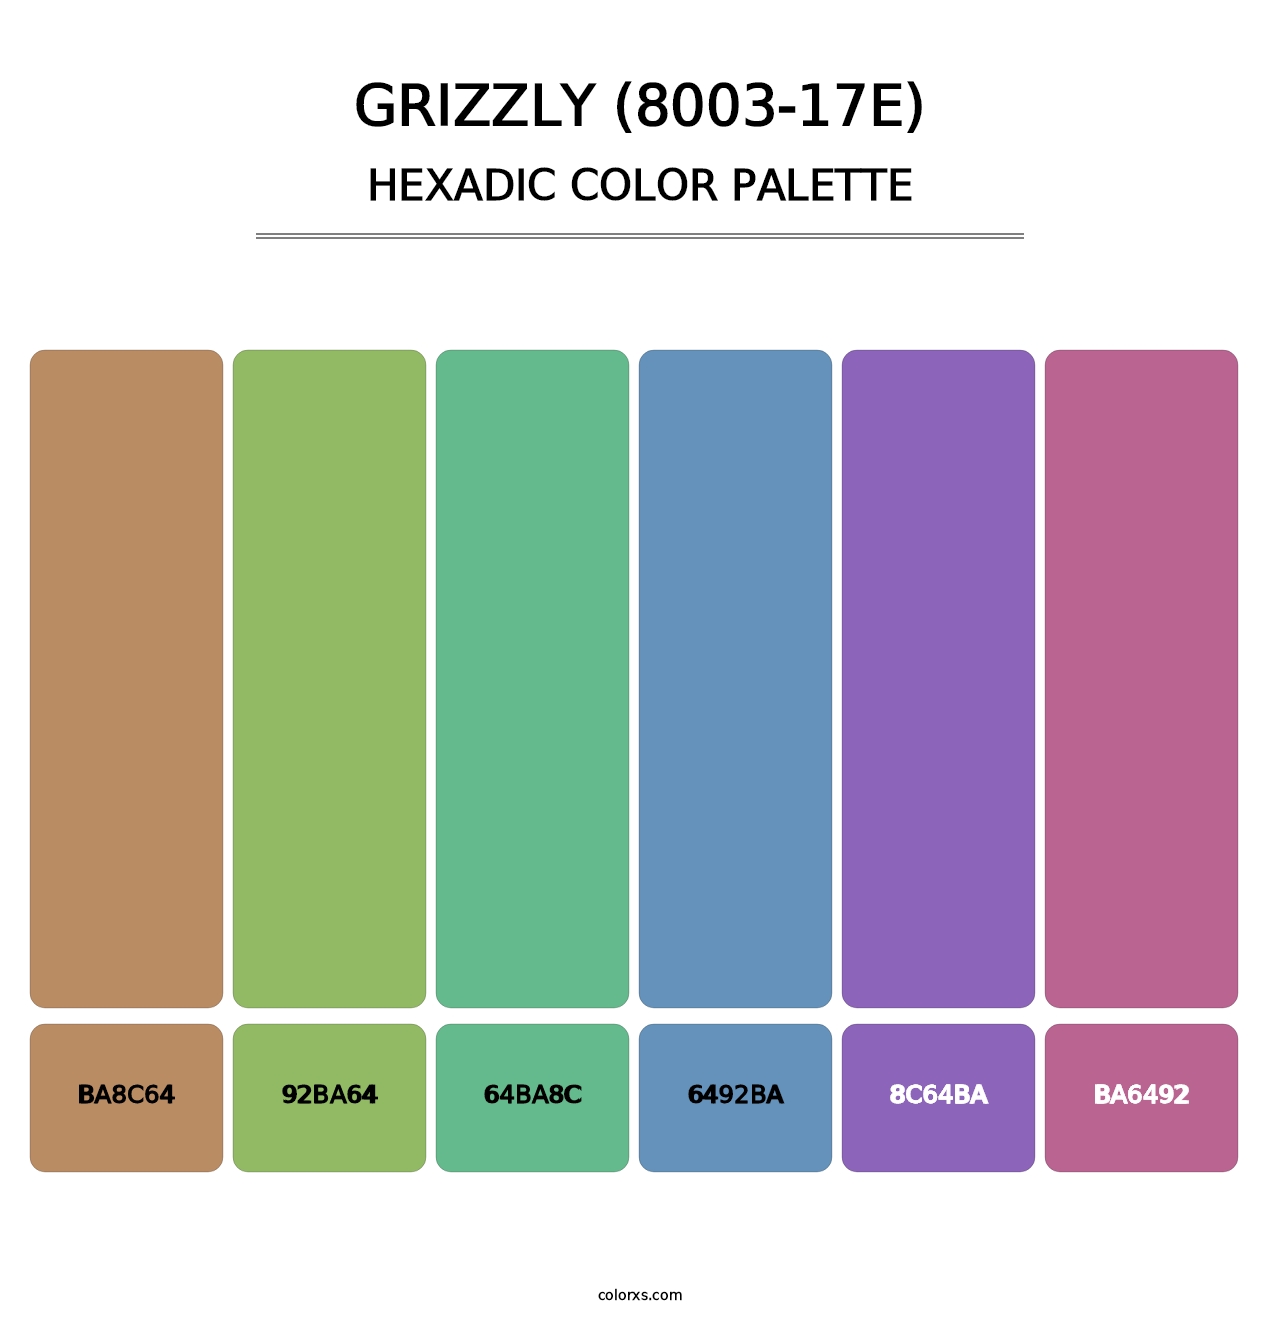 Grizzly (8003-17E) - Hexadic Color Palette